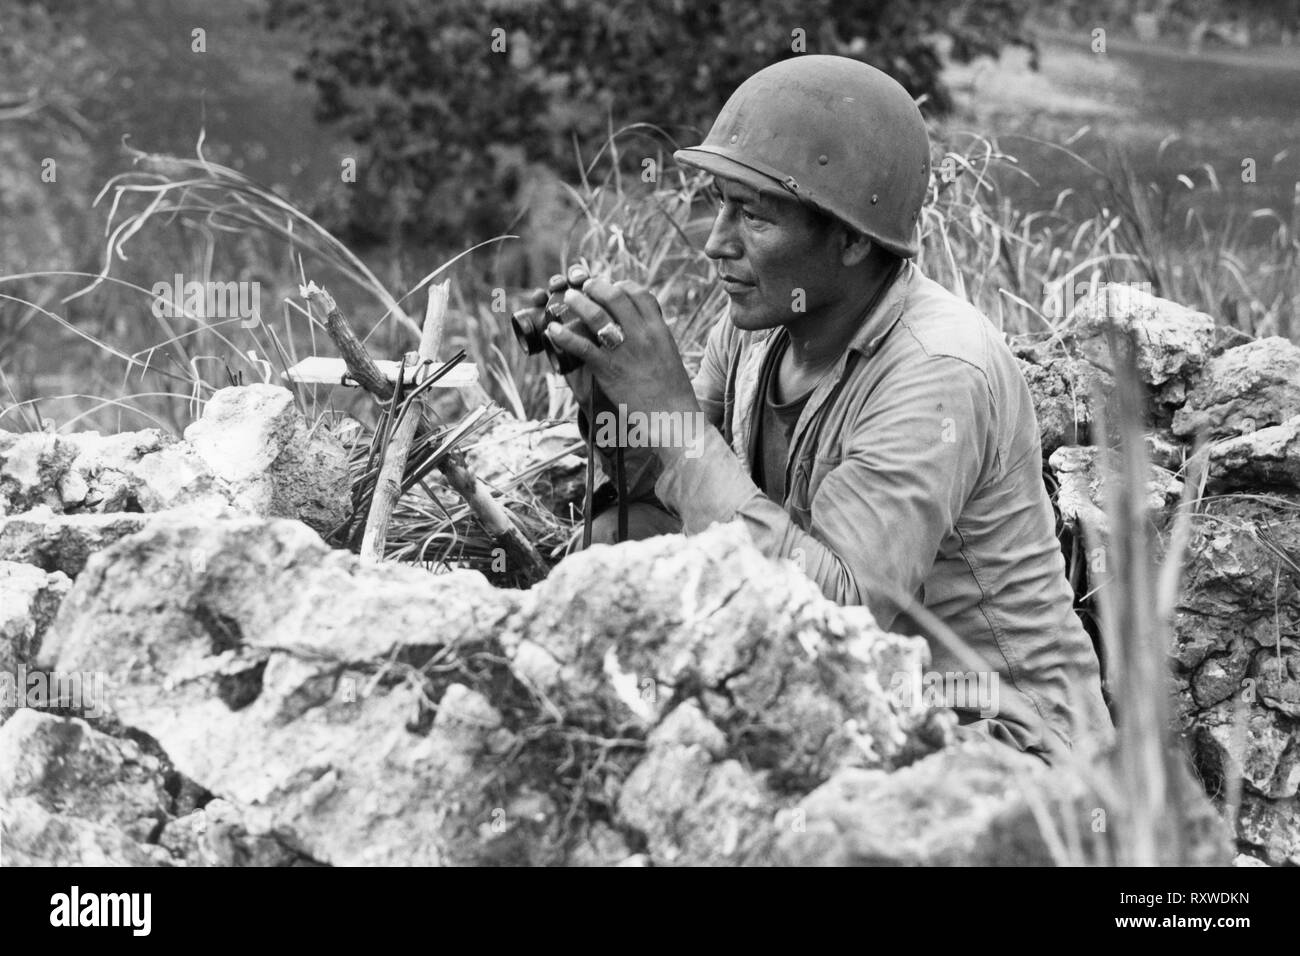 Navajo Indian code-talker Pfc Carl Gorman of Chinle, Arizona, manning an observation post on a hill overlooking the City of Garapan, while the U.S. Marines were consolidating their positions on the Island of Saipan, Marianas on June 27, 1944 During the Battle of Saipan. Stock Photo